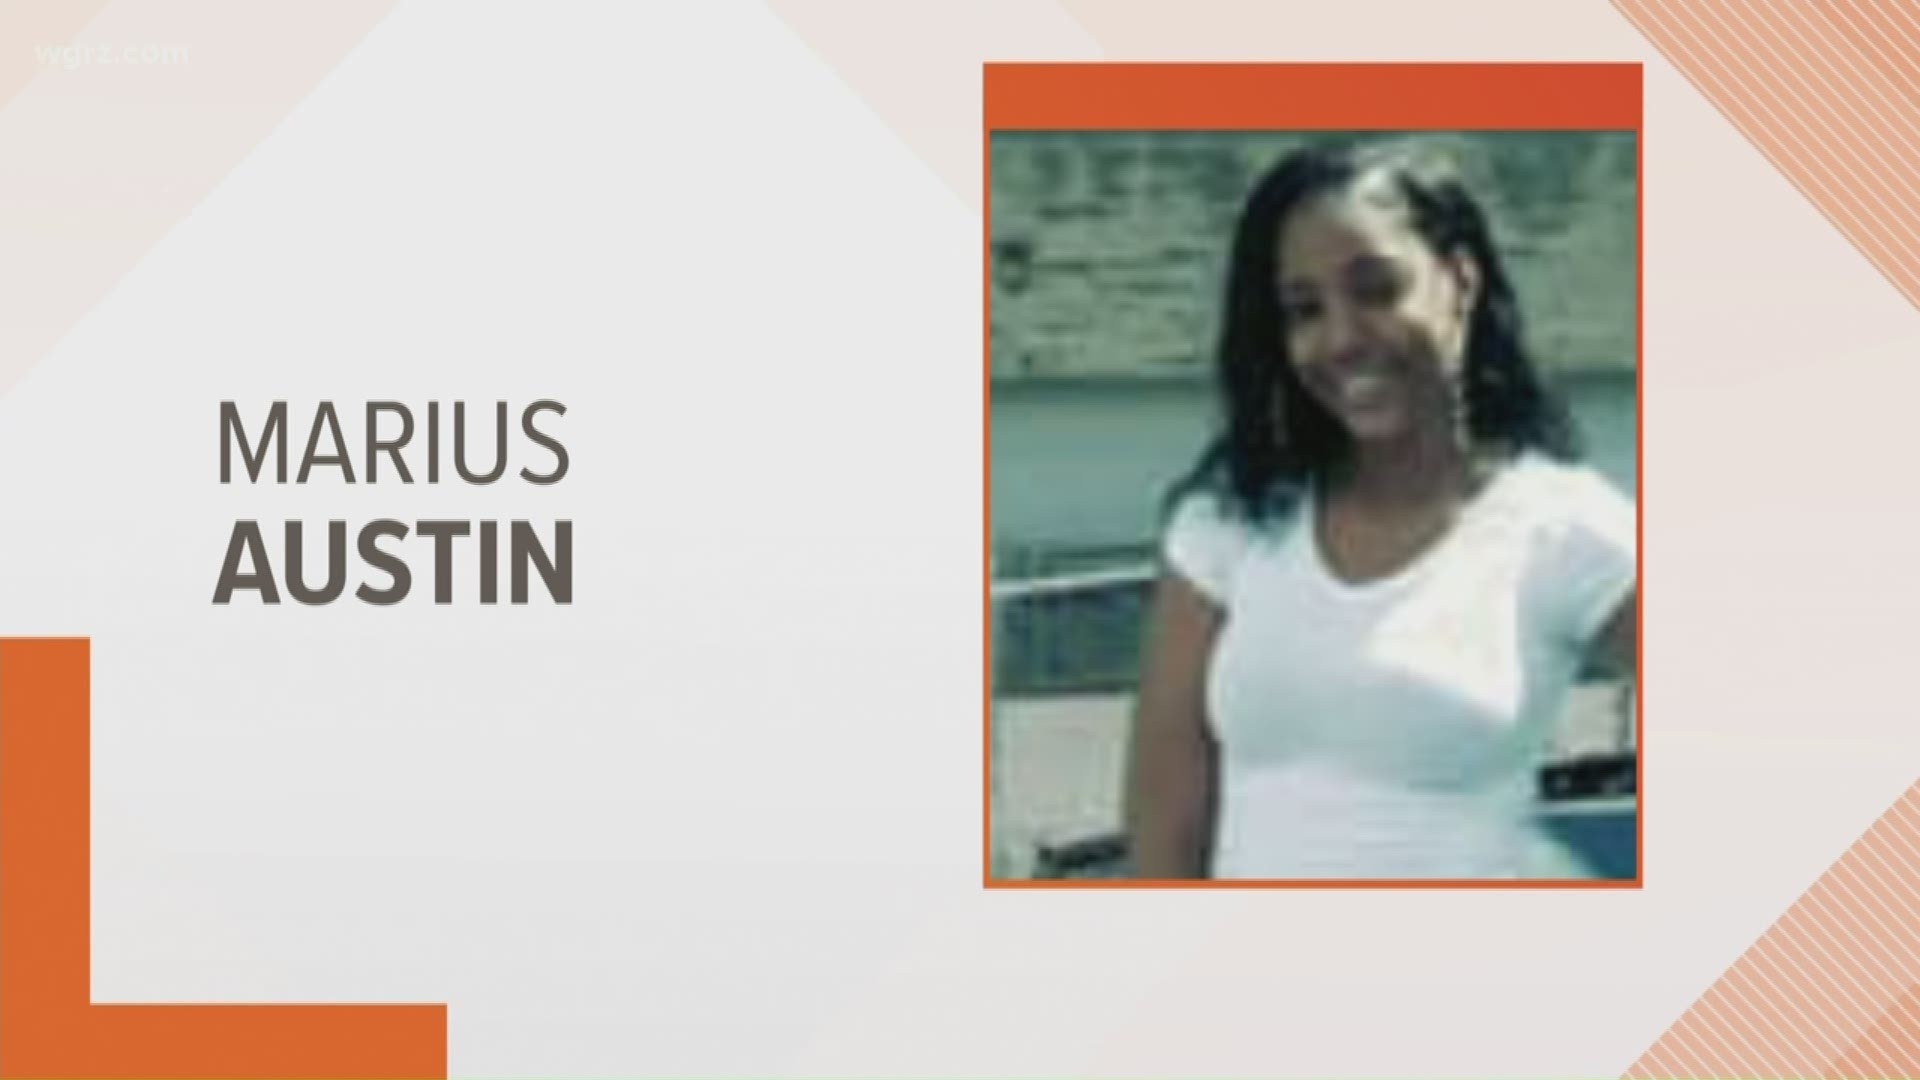 Police say Marius Austin was last seen at her home on Bailey Avenue, has been missing since April.